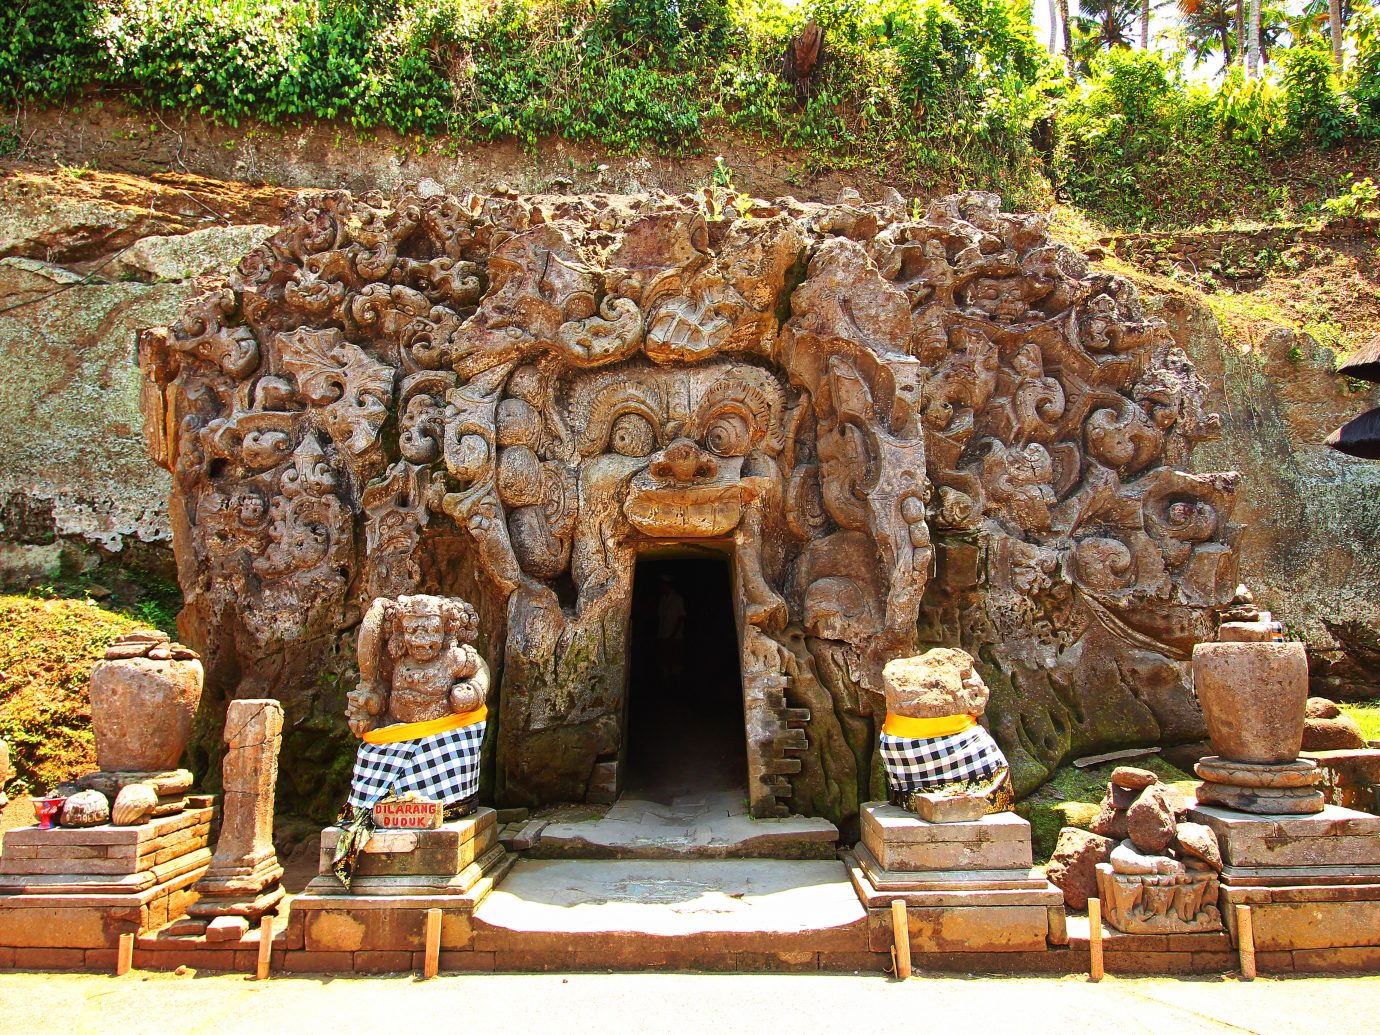 Elephant Cave temple and forest in Bali, Goa Gajah